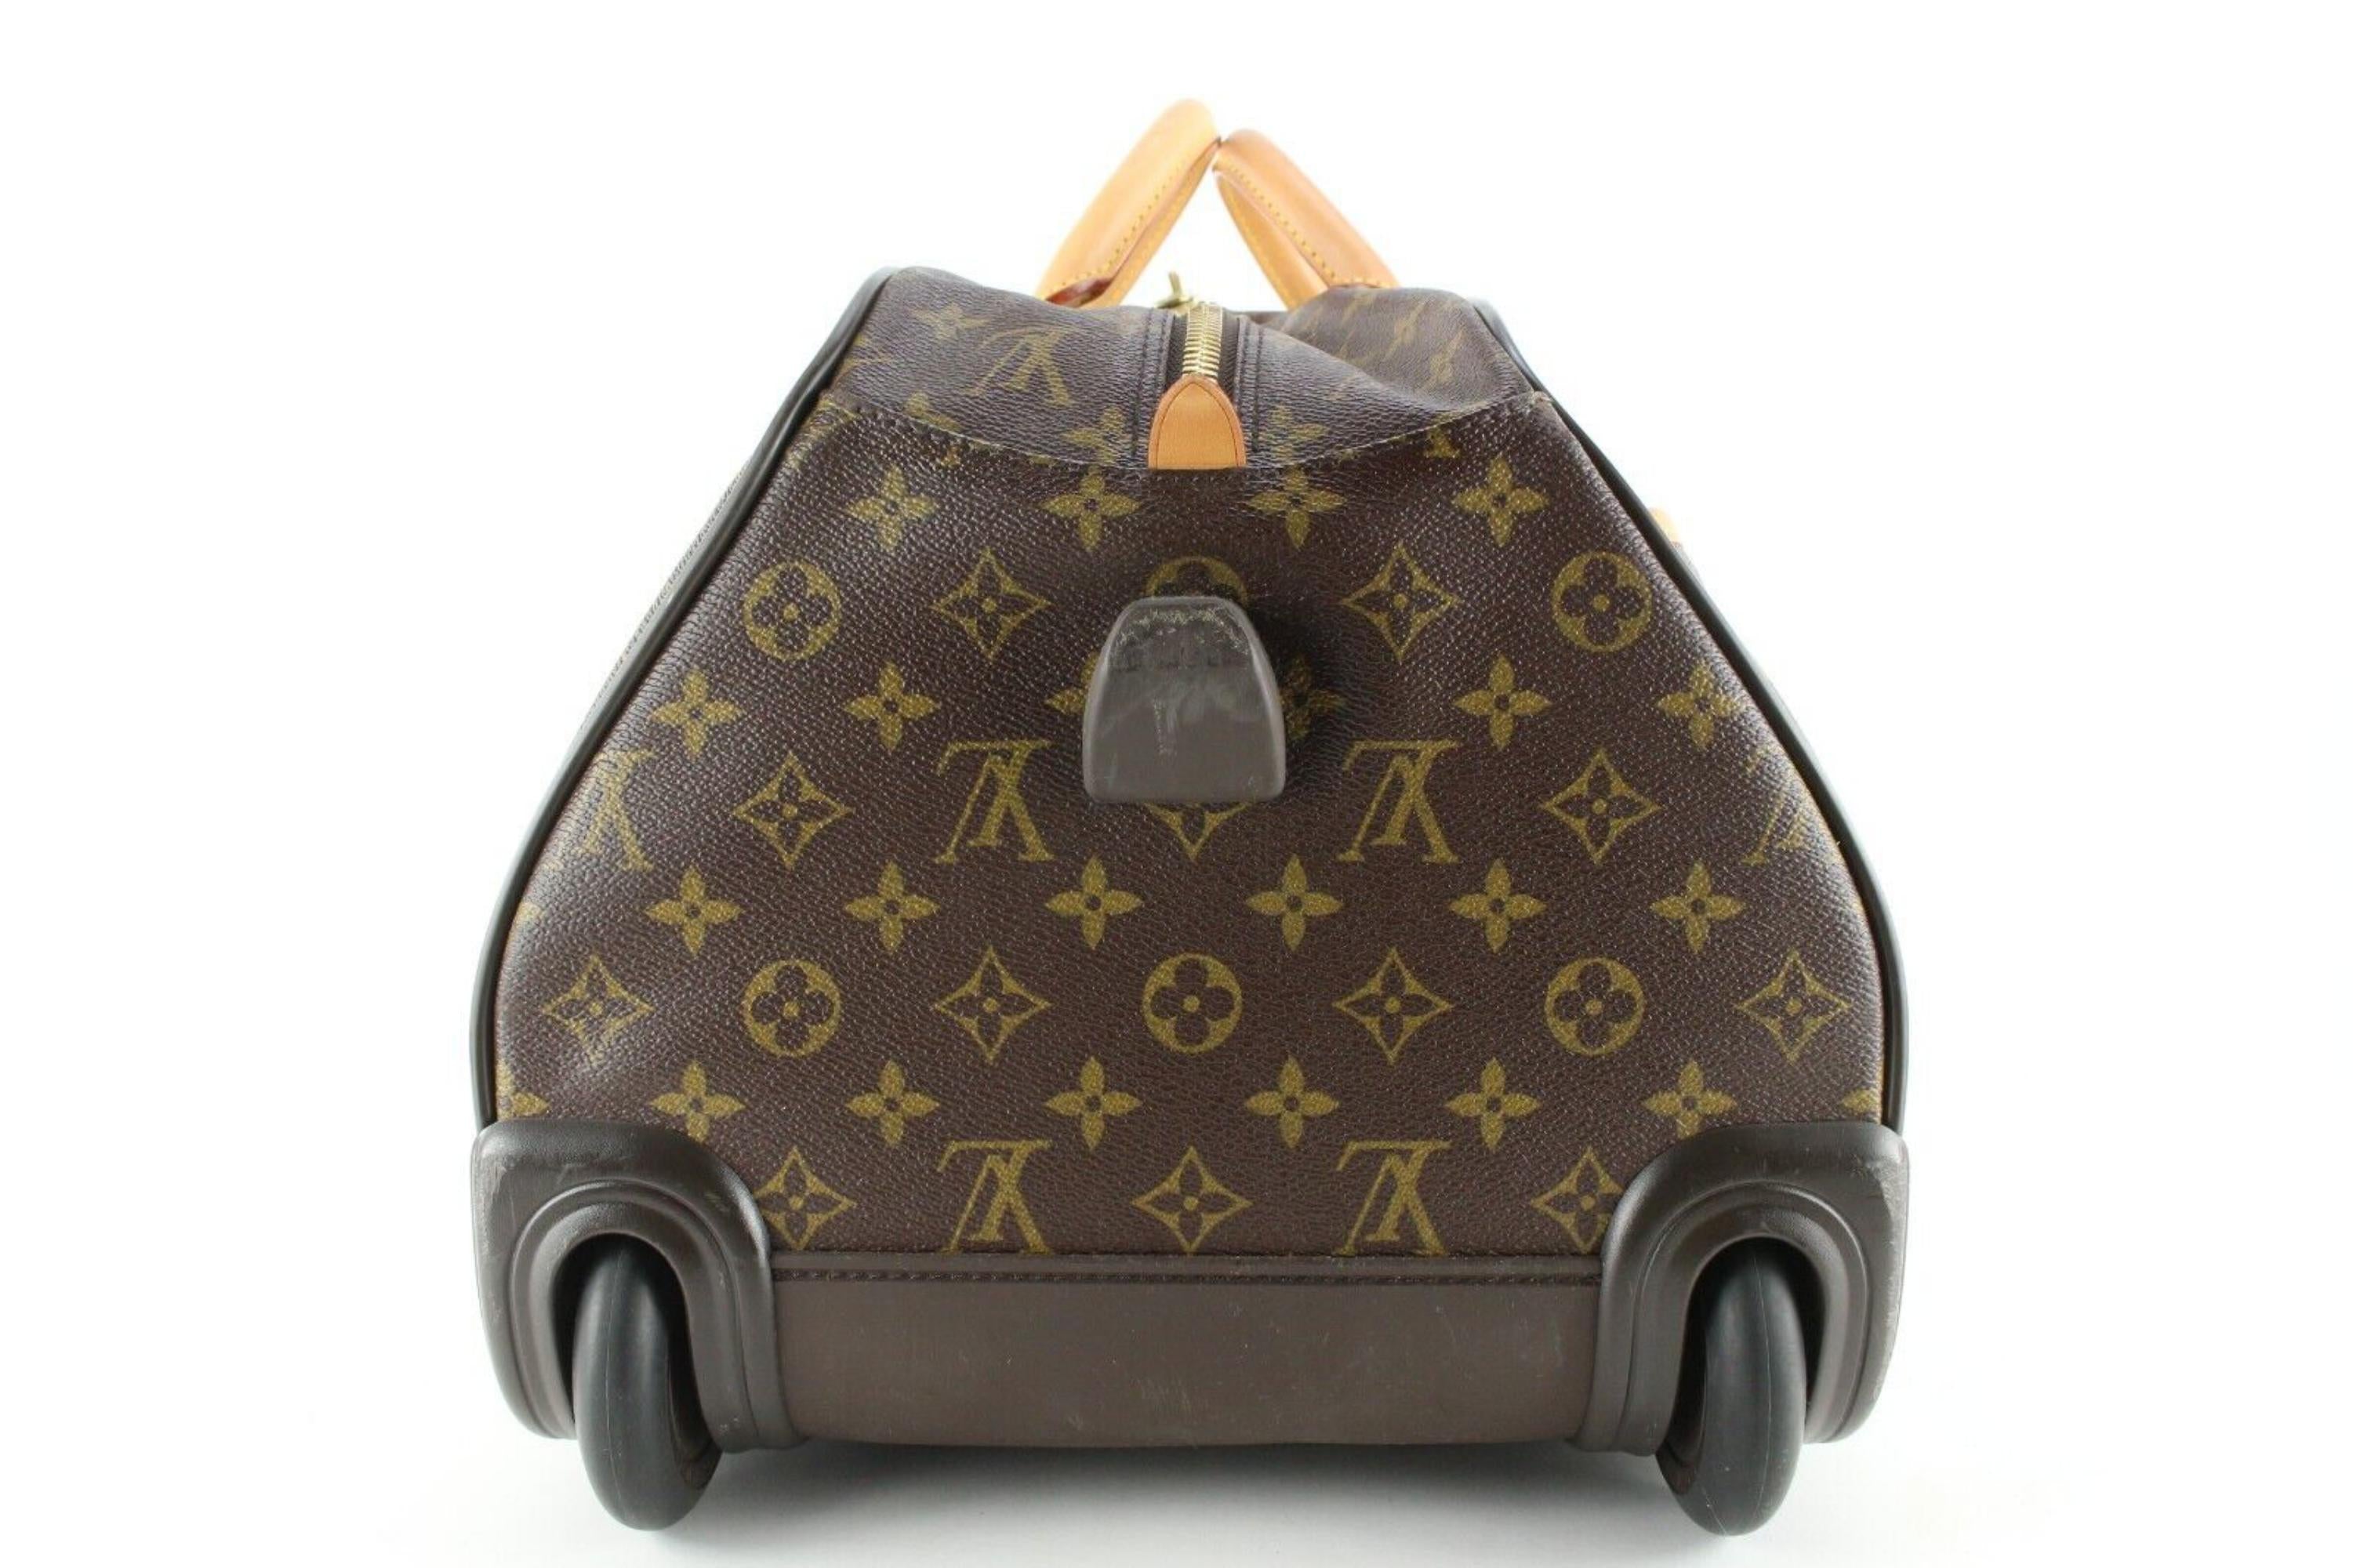 Louis Vuitton Monogram Eole 50 - Brown Luggage and Travel